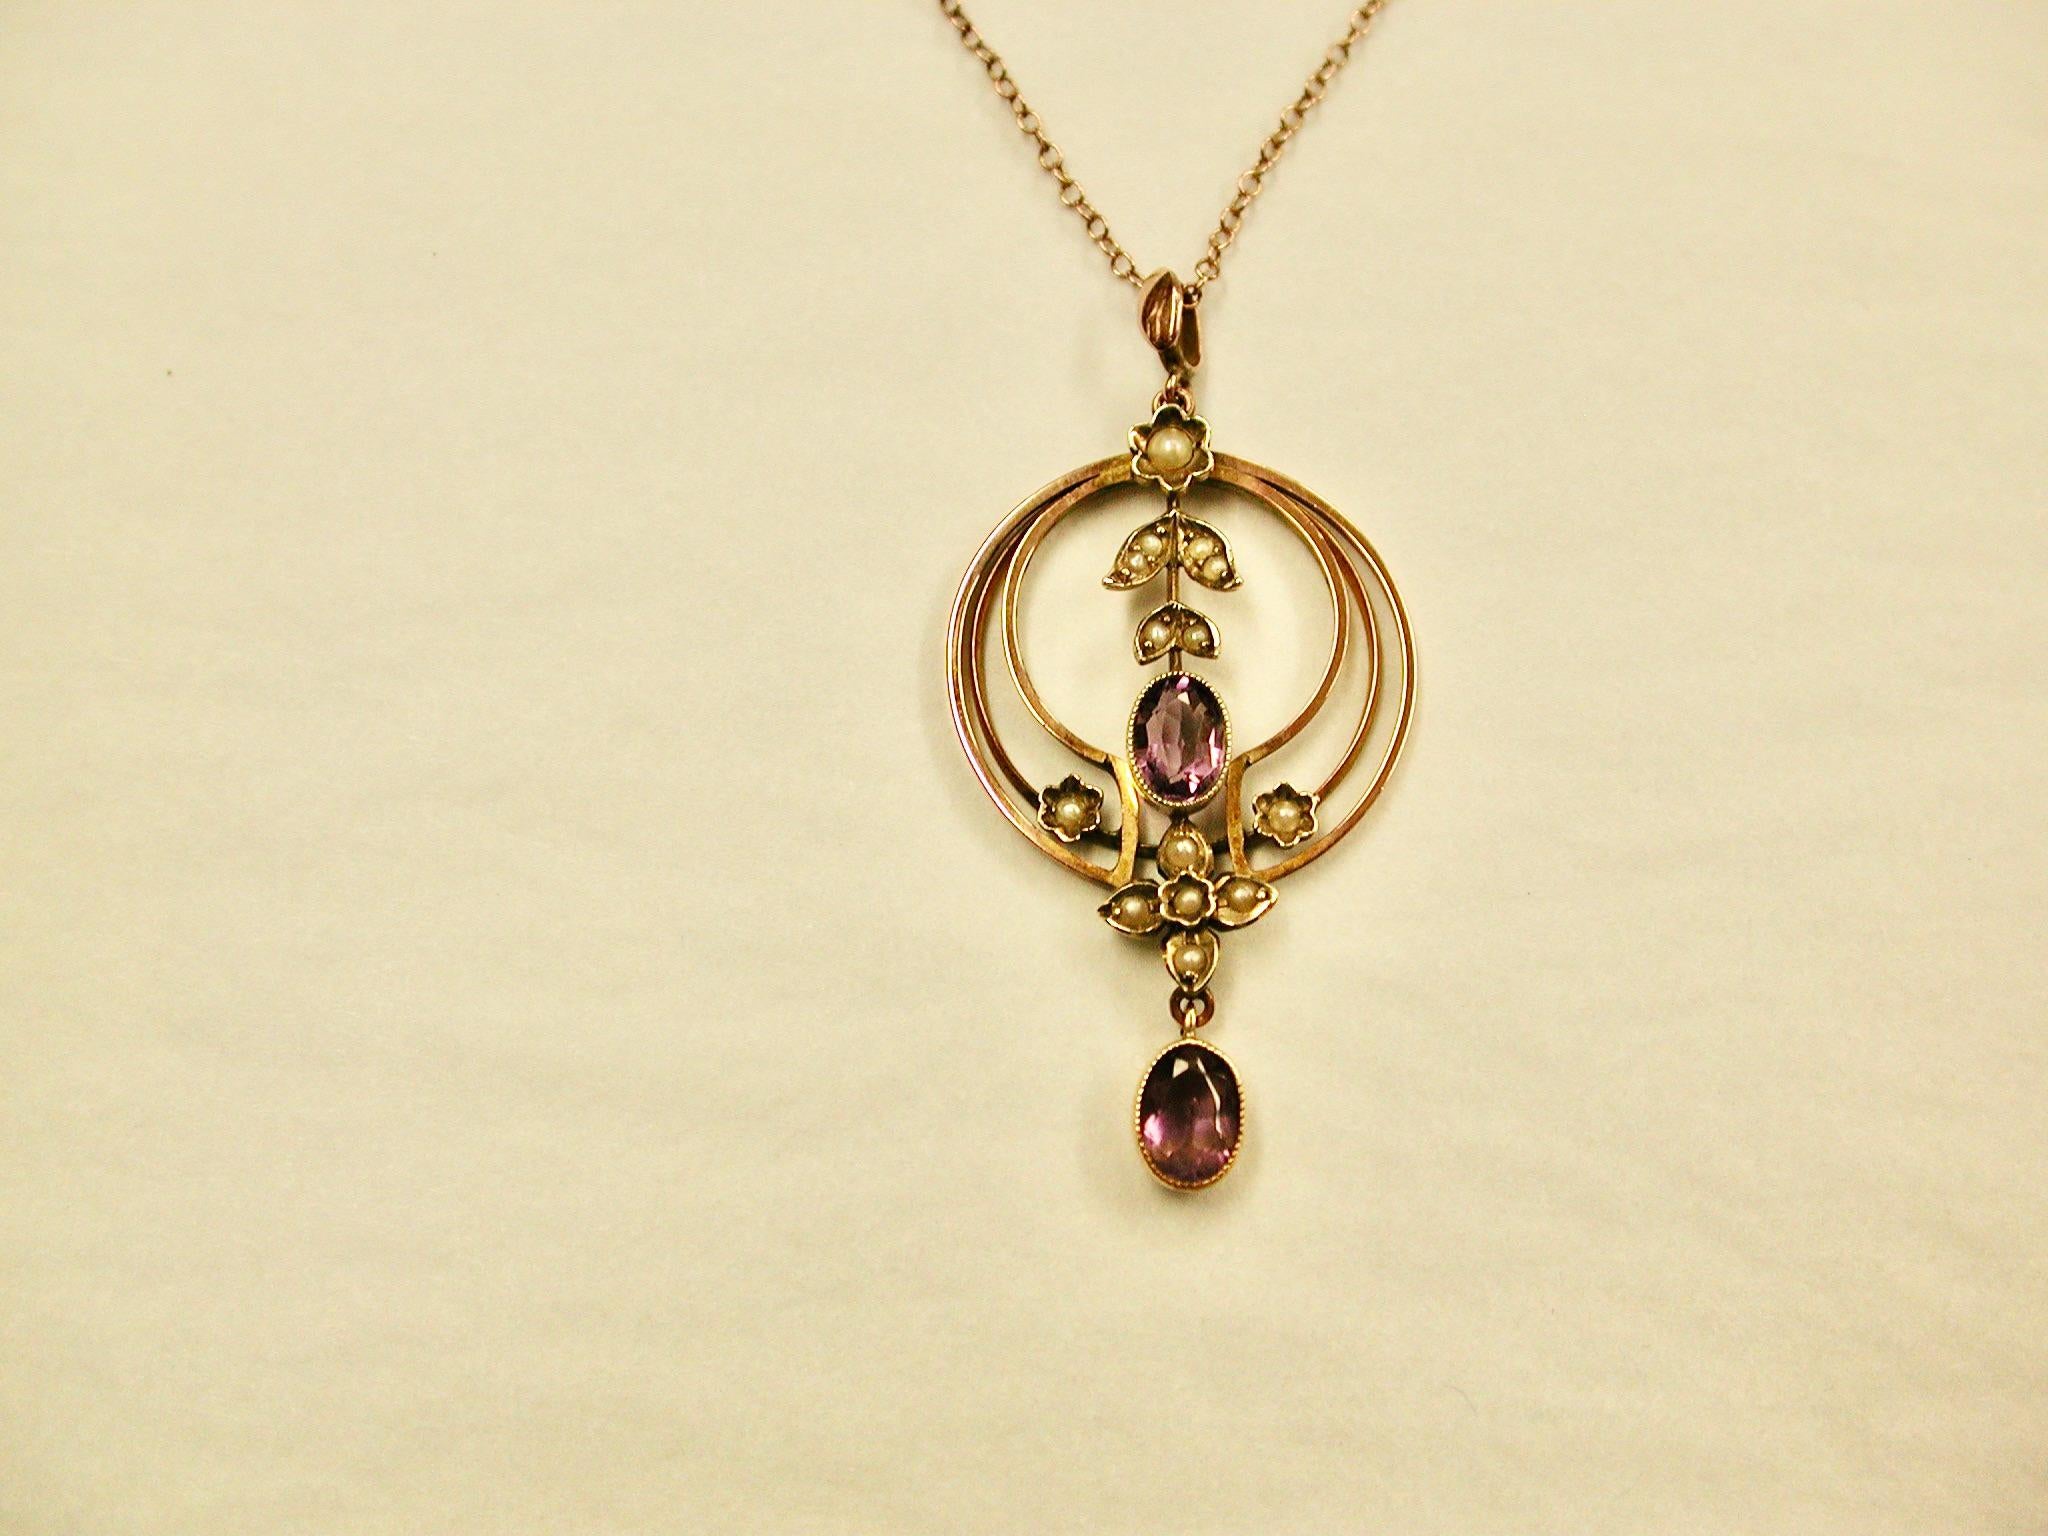 Antique Edwardian 9 Ct  Pink Gold Pendant & Chain,Set With Amethyst & Half Pearl, circa 1905
Original Chain with Barrel snap, length 15.5 Inches.
Gold,Pearls and Amethysts are in good condition